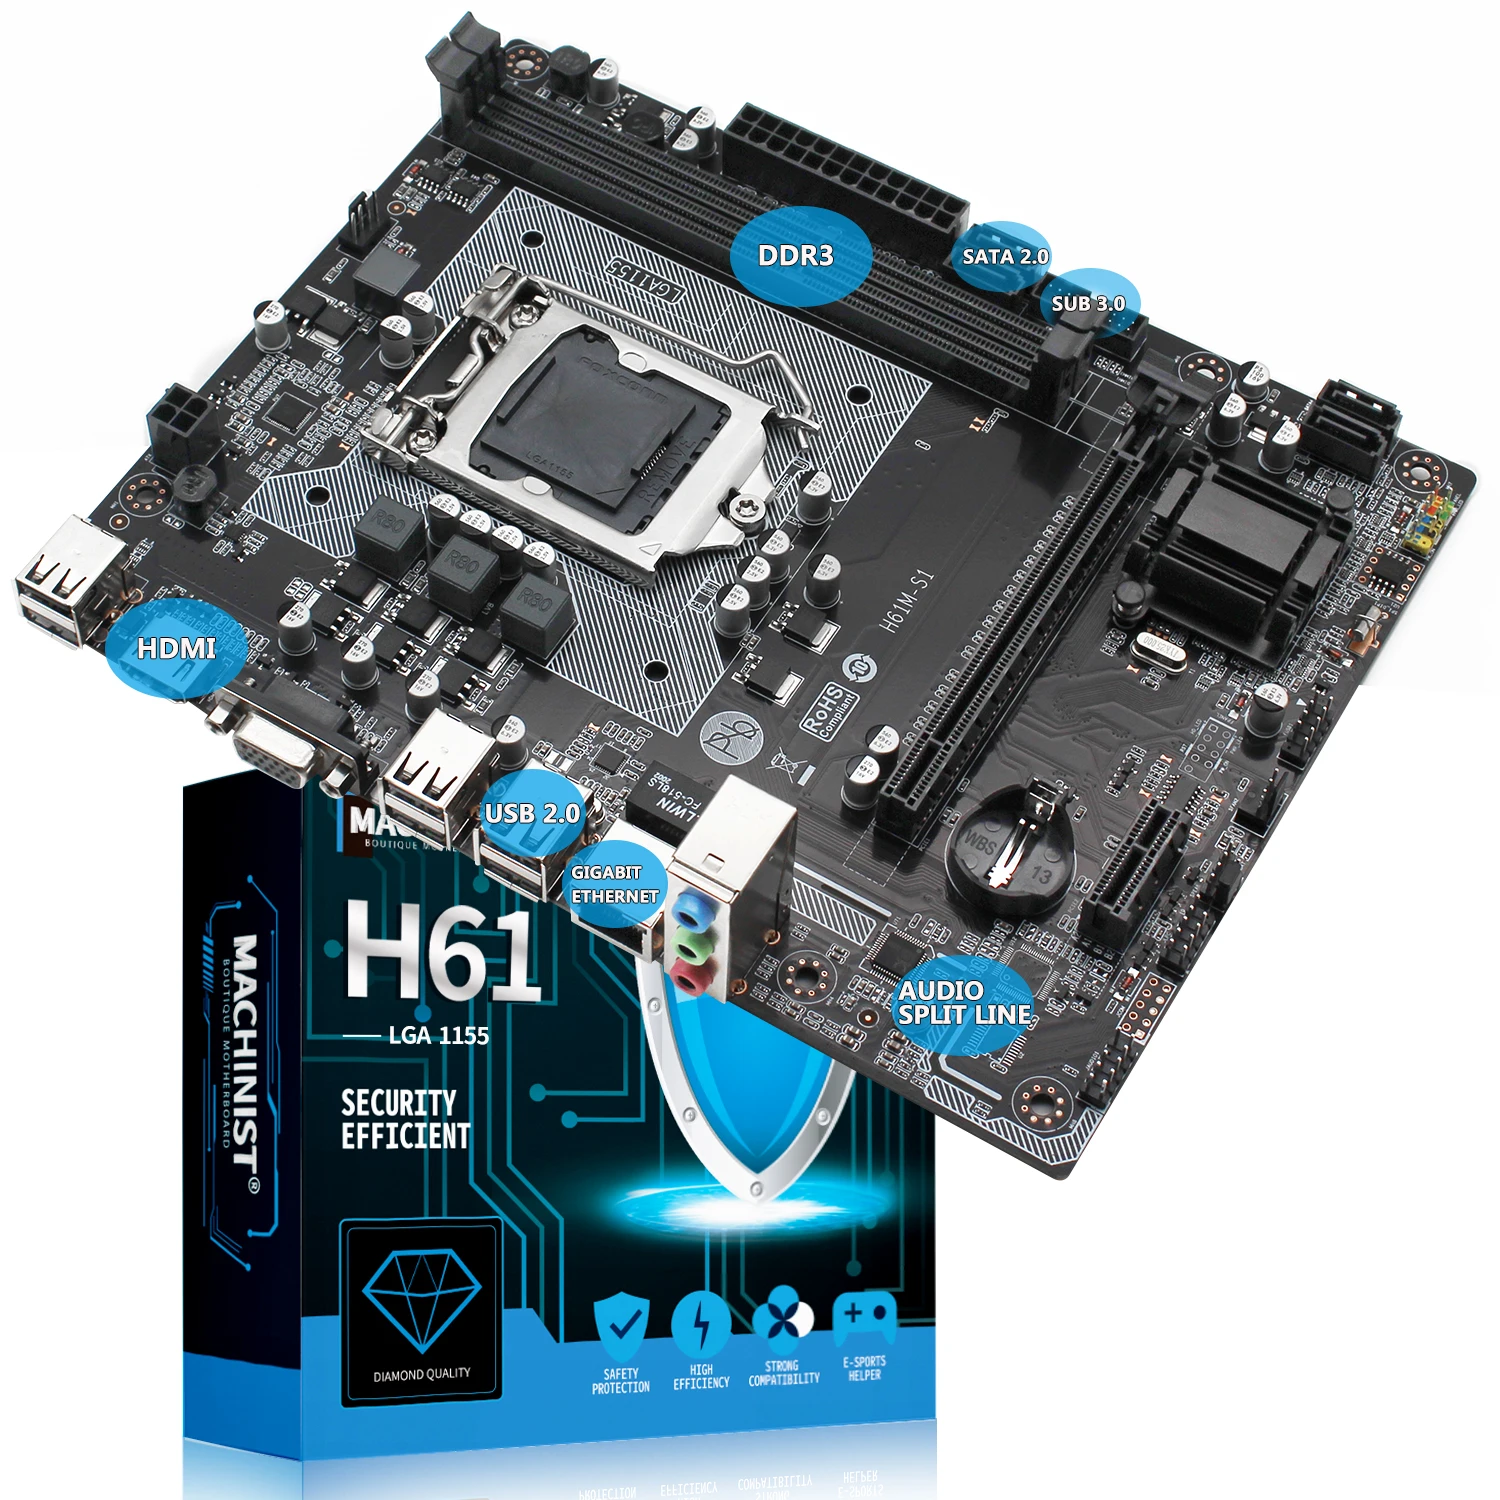 machinist h61 motherboard set with intel core i3 3220 lga 1155 cpu 2pcs x 8gb 16gb 1600mhz ddr memory h61 s1 free global shipping